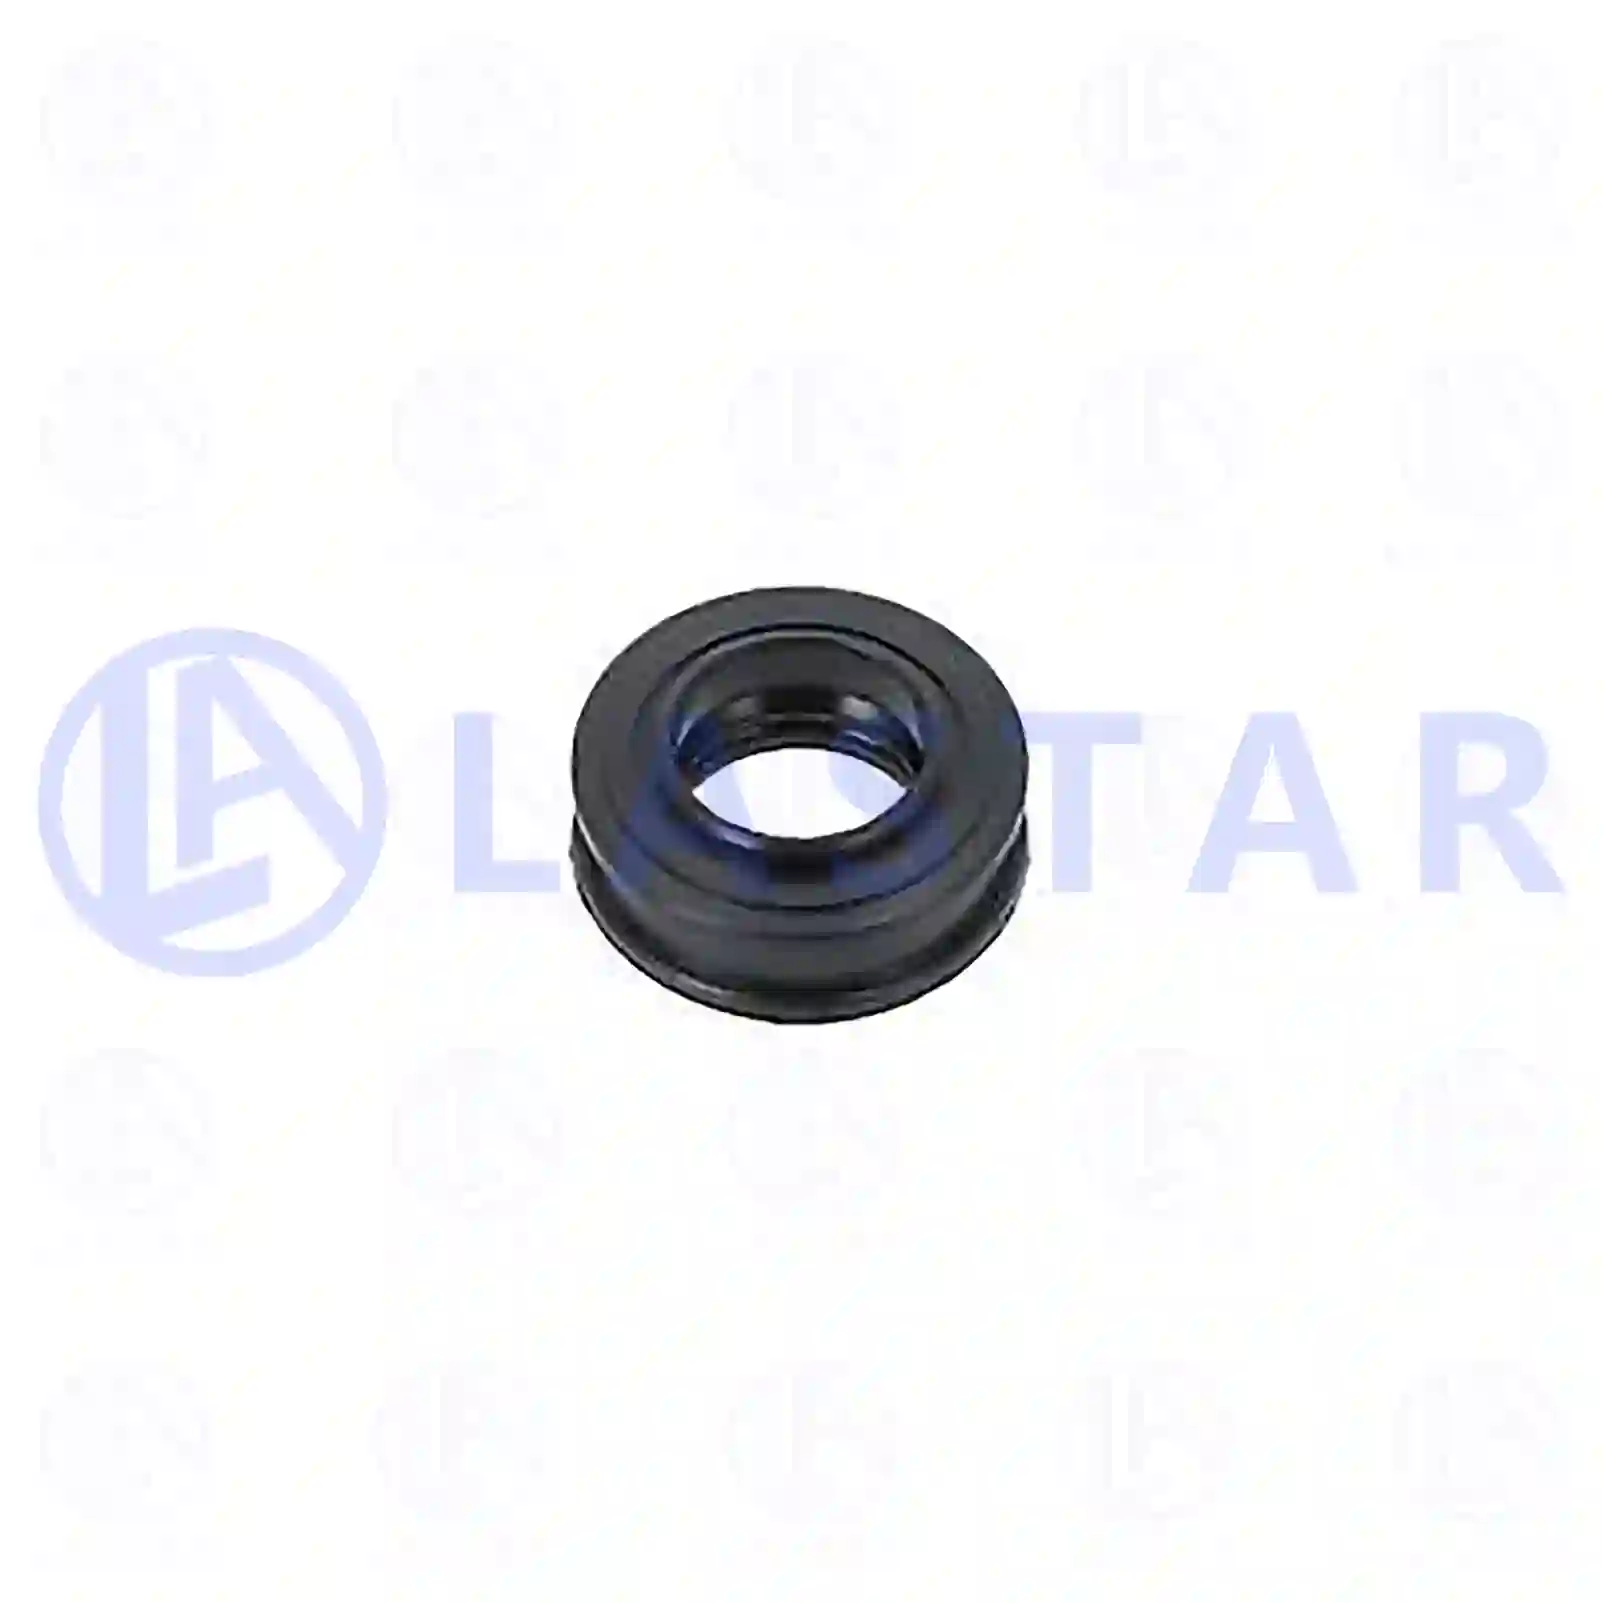 Seal ring, 77700847, 8192526 ||  77700847 Lastar Spare Part | Truck Spare Parts, Auotomotive Spare Parts Seal ring, 77700847, 8192526 ||  77700847 Lastar Spare Part | Truck Spare Parts, Auotomotive Spare Parts